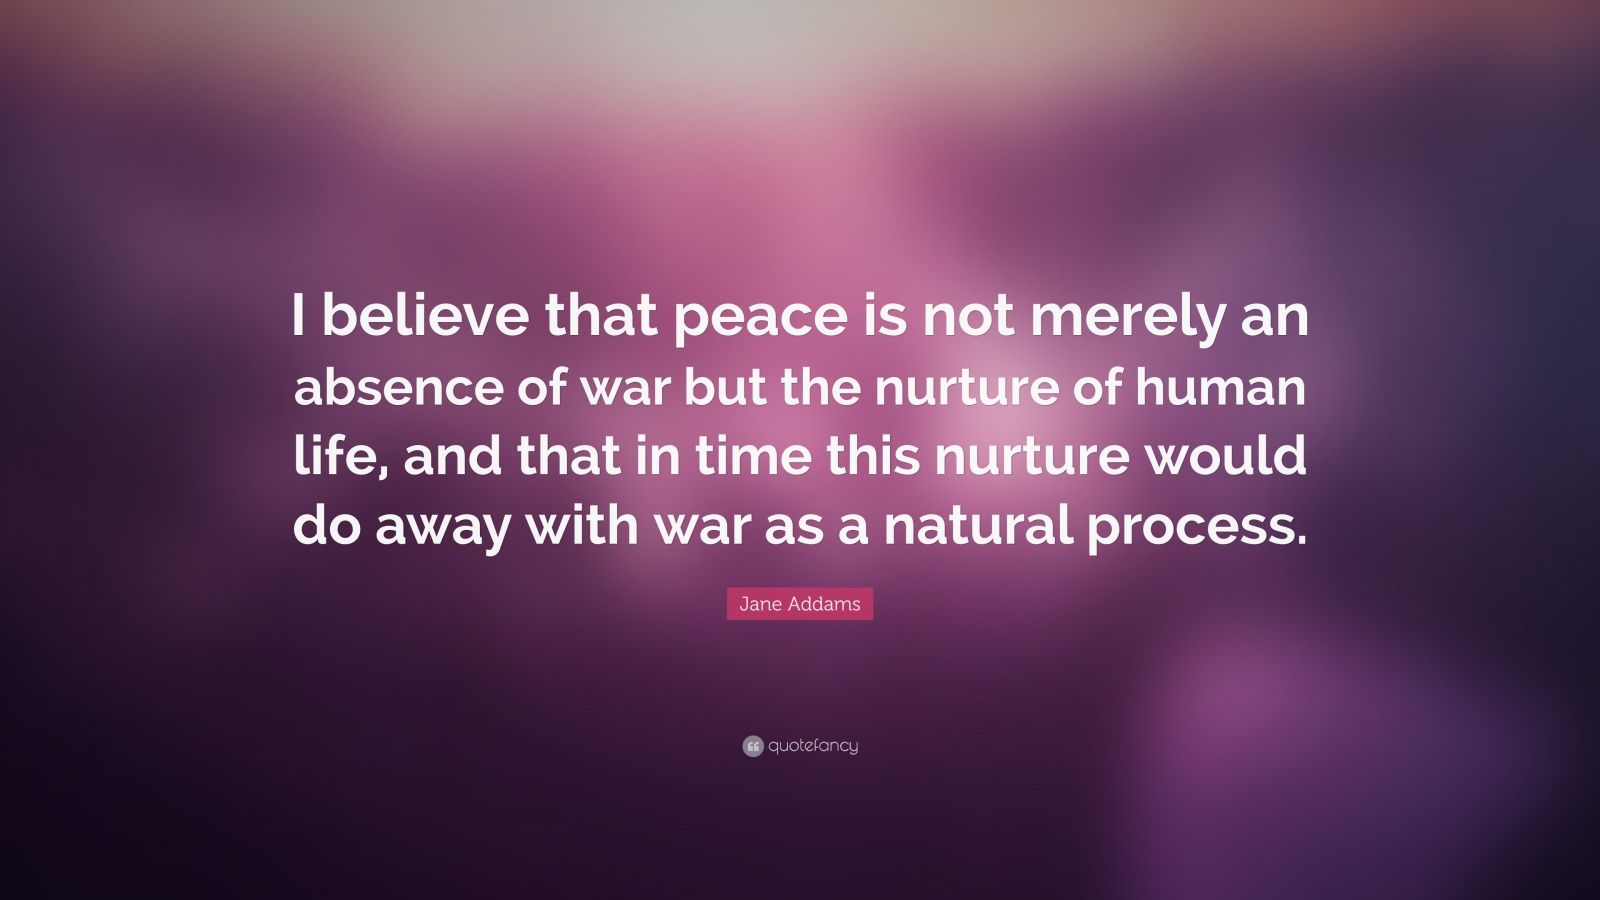 Jane Addams Quote: “I believe that peace is not merely an absence of ...